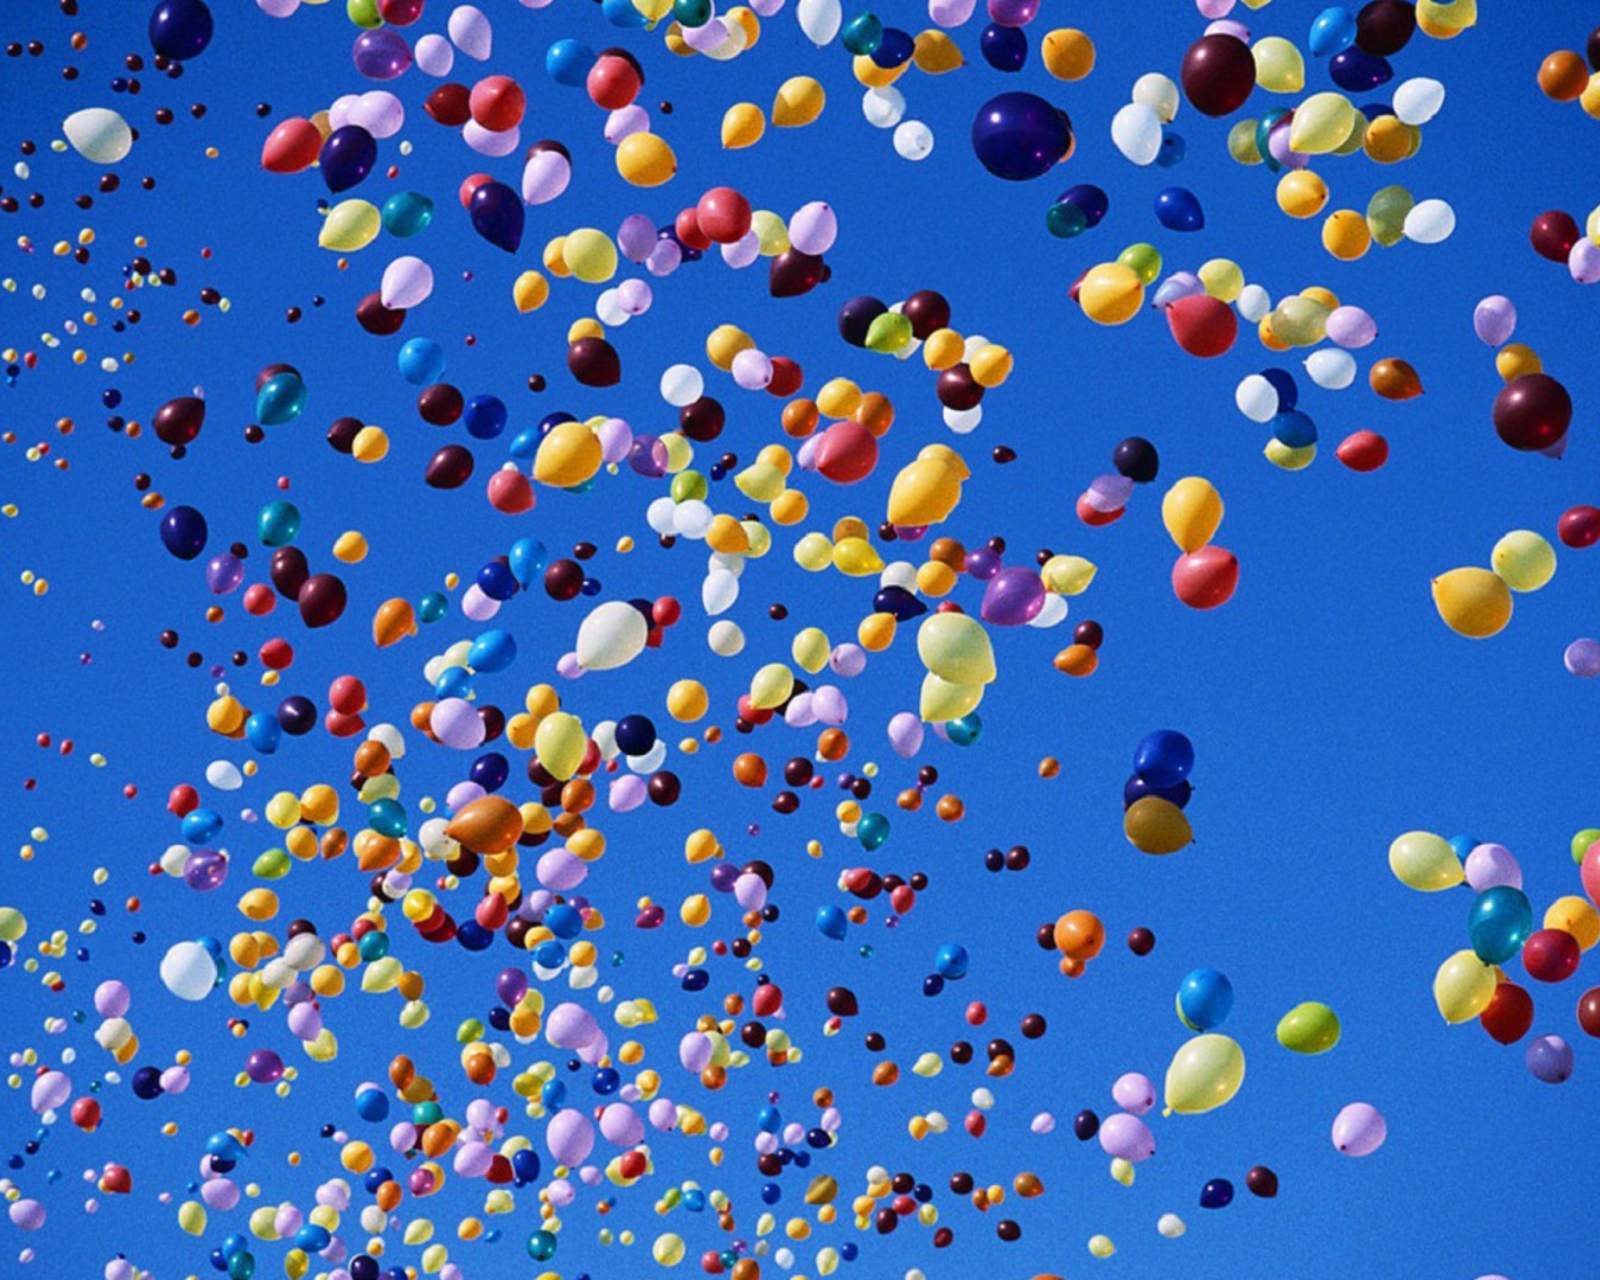 Colorful Balloons In Blue Sky screenshot #1 1600x1280